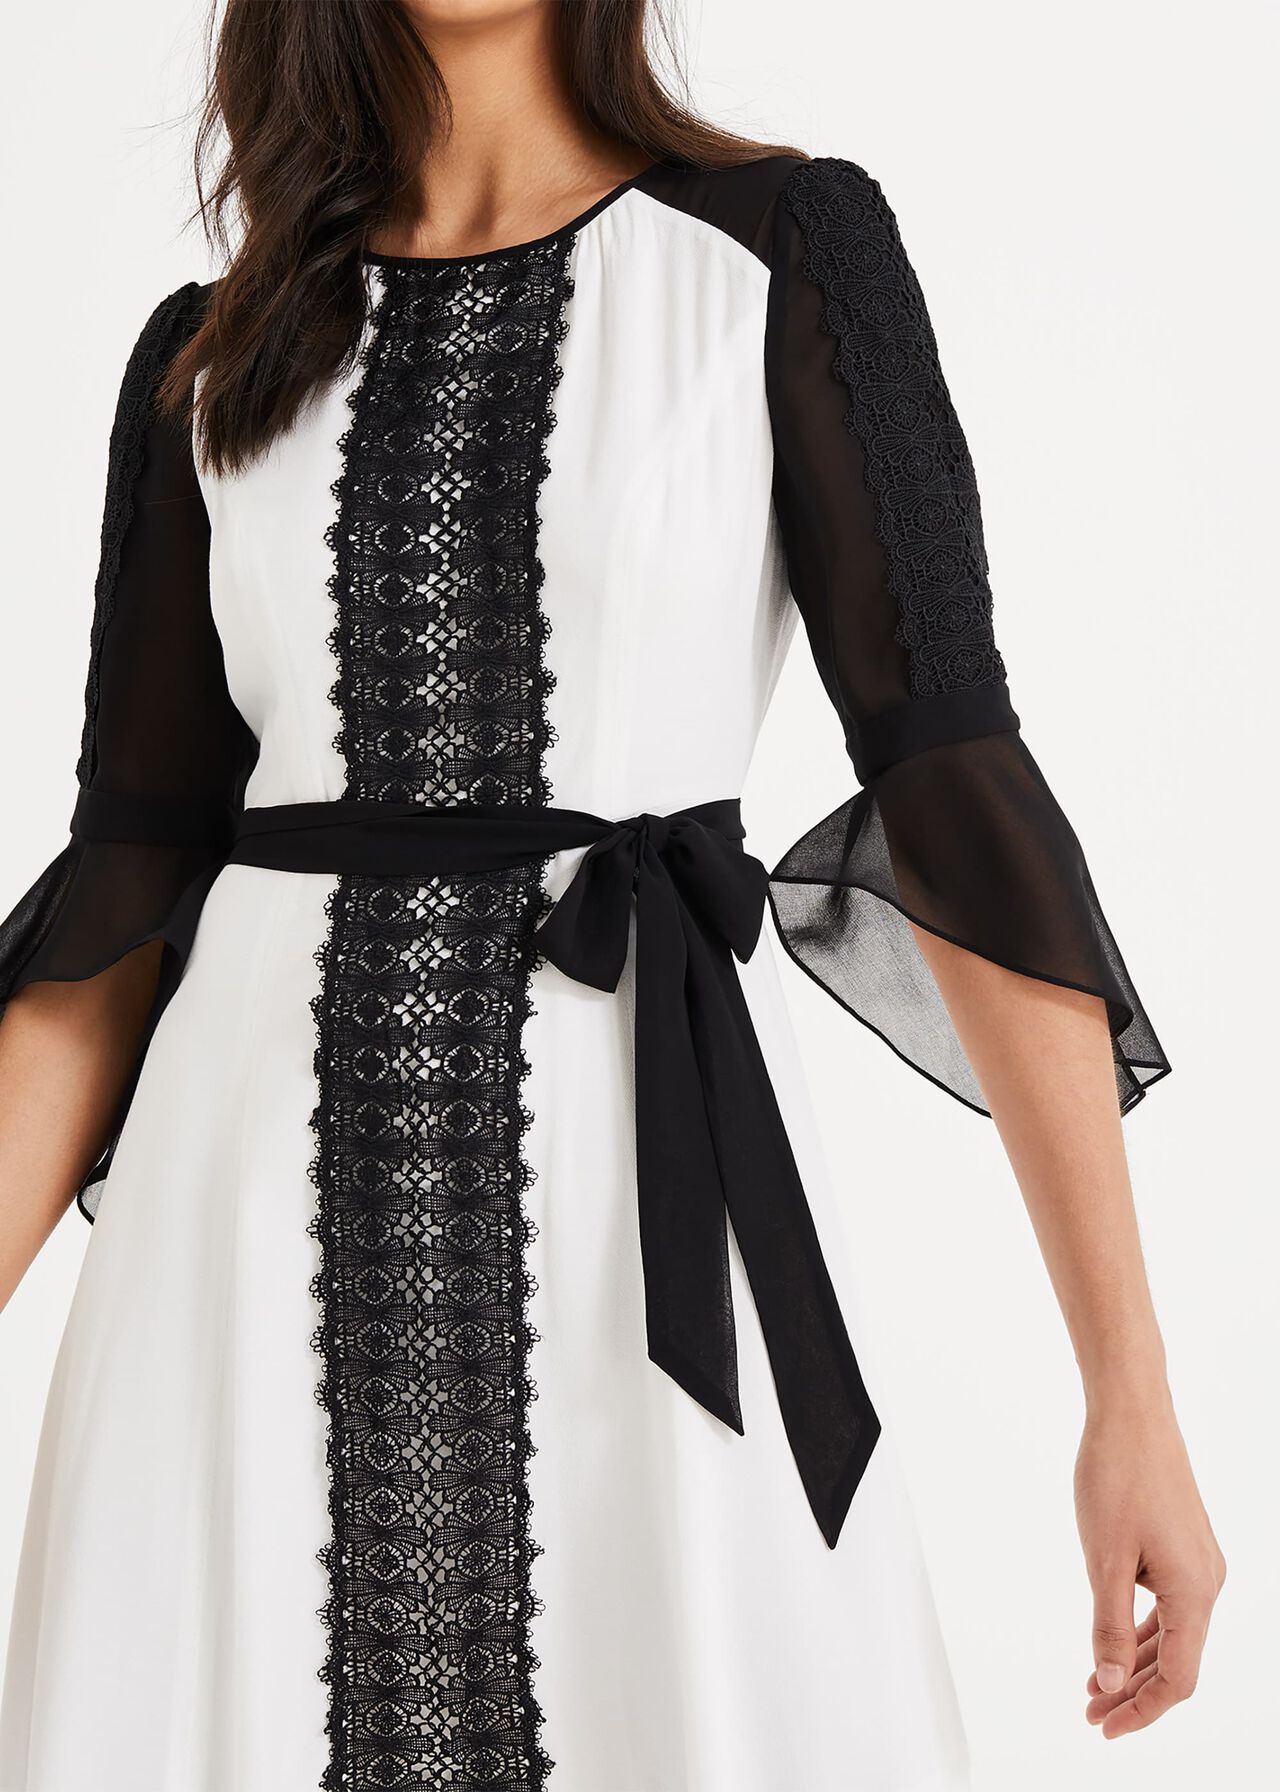 Cia Lace Belted Dress